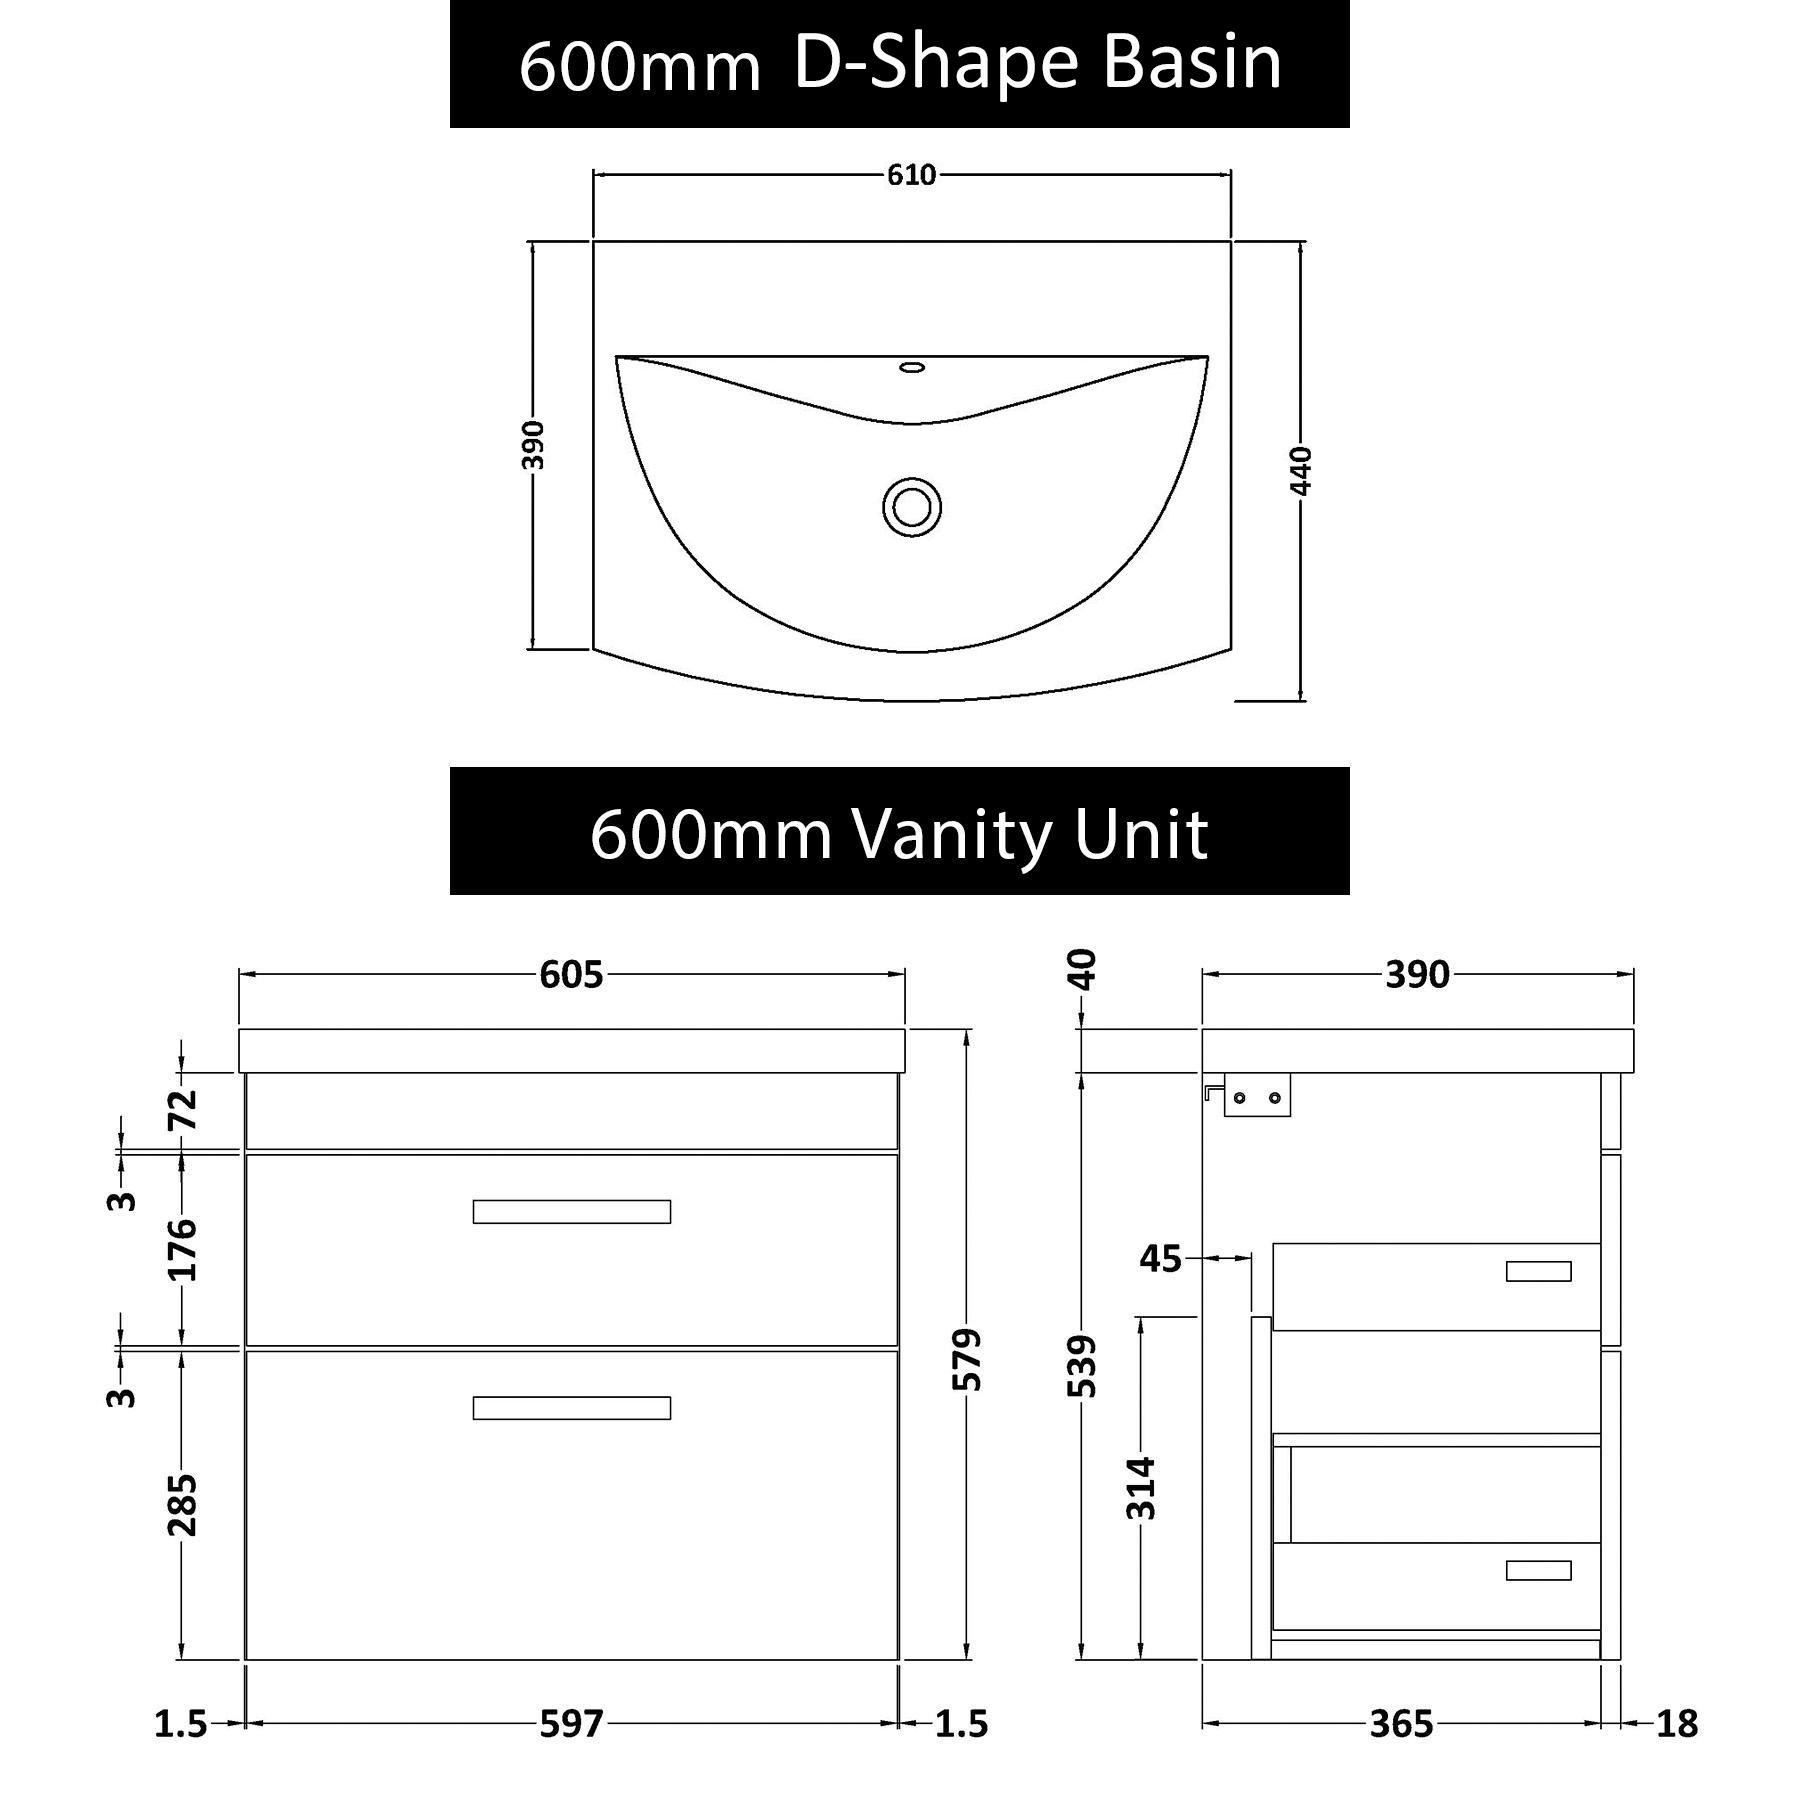  Marbella 500/600/800mm Grey Elm 2 Drawer Wall Hung Vanity Unit with Curved Basin